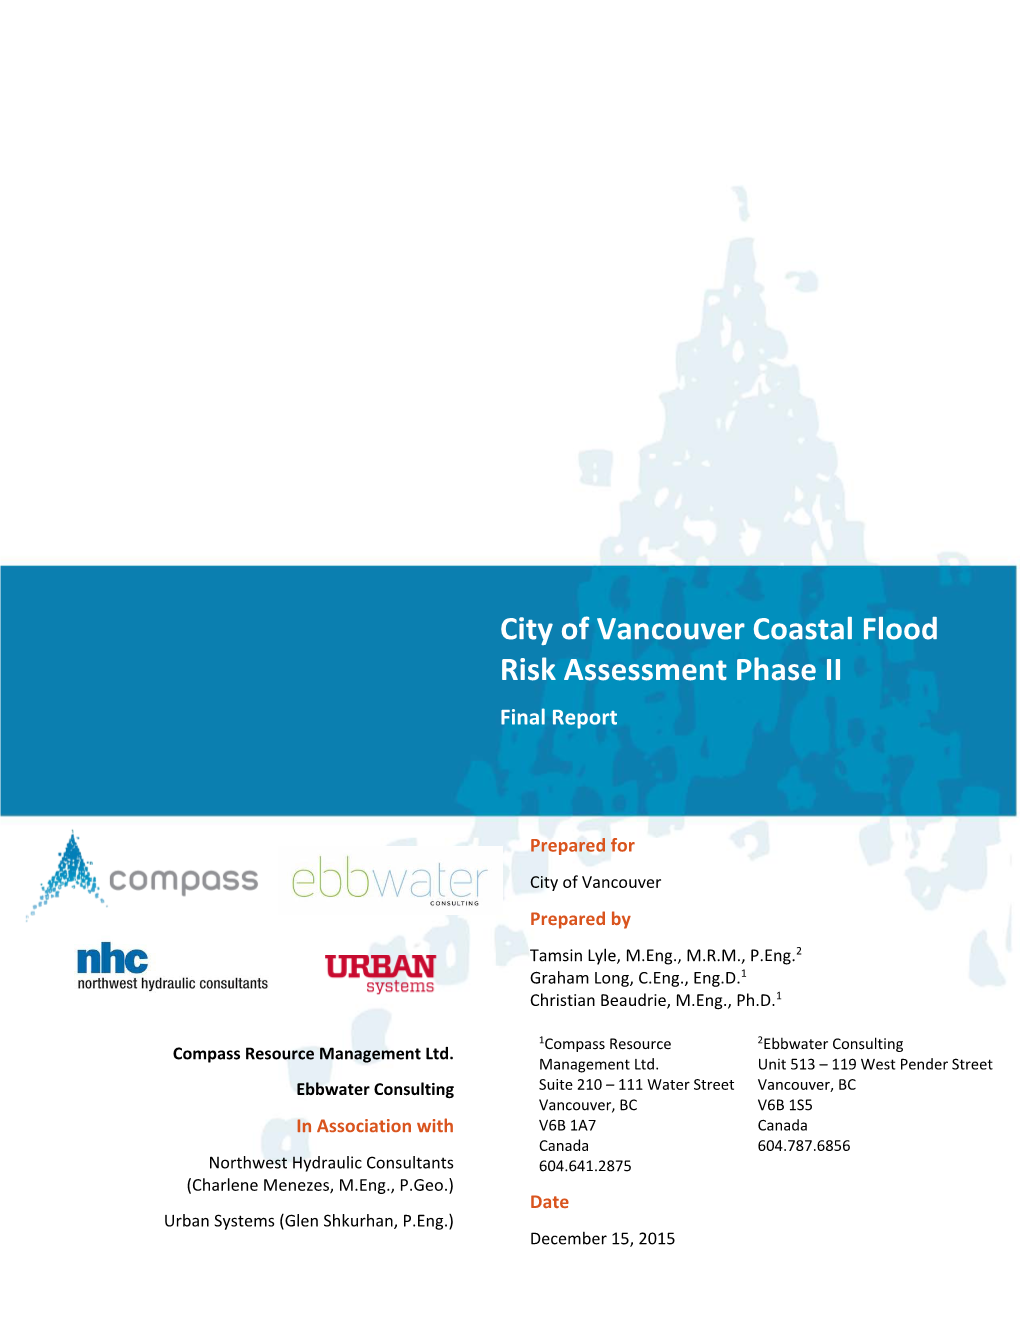 City of Vancouver Coastal Flood Risk Assessment Phase II Final Report